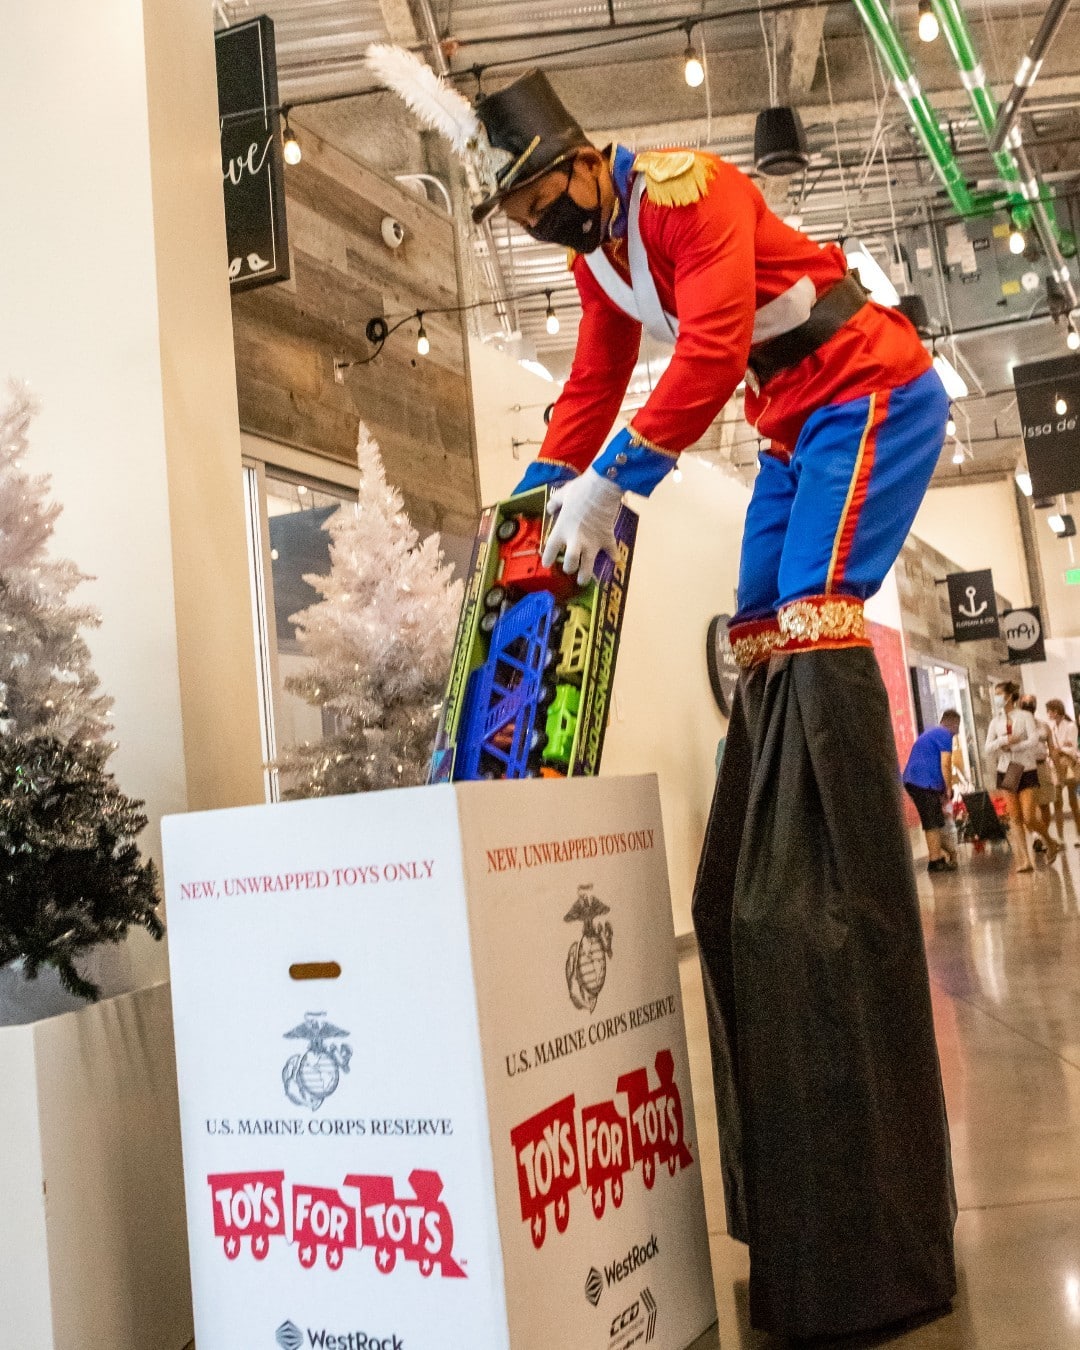 Spread aloha and good cheer this season by dropping off an unopened toy in the designated Toys for Tots bins located at South Shore Market and Ward Centre, now through December 11. All donations will be distributed to local keiki.